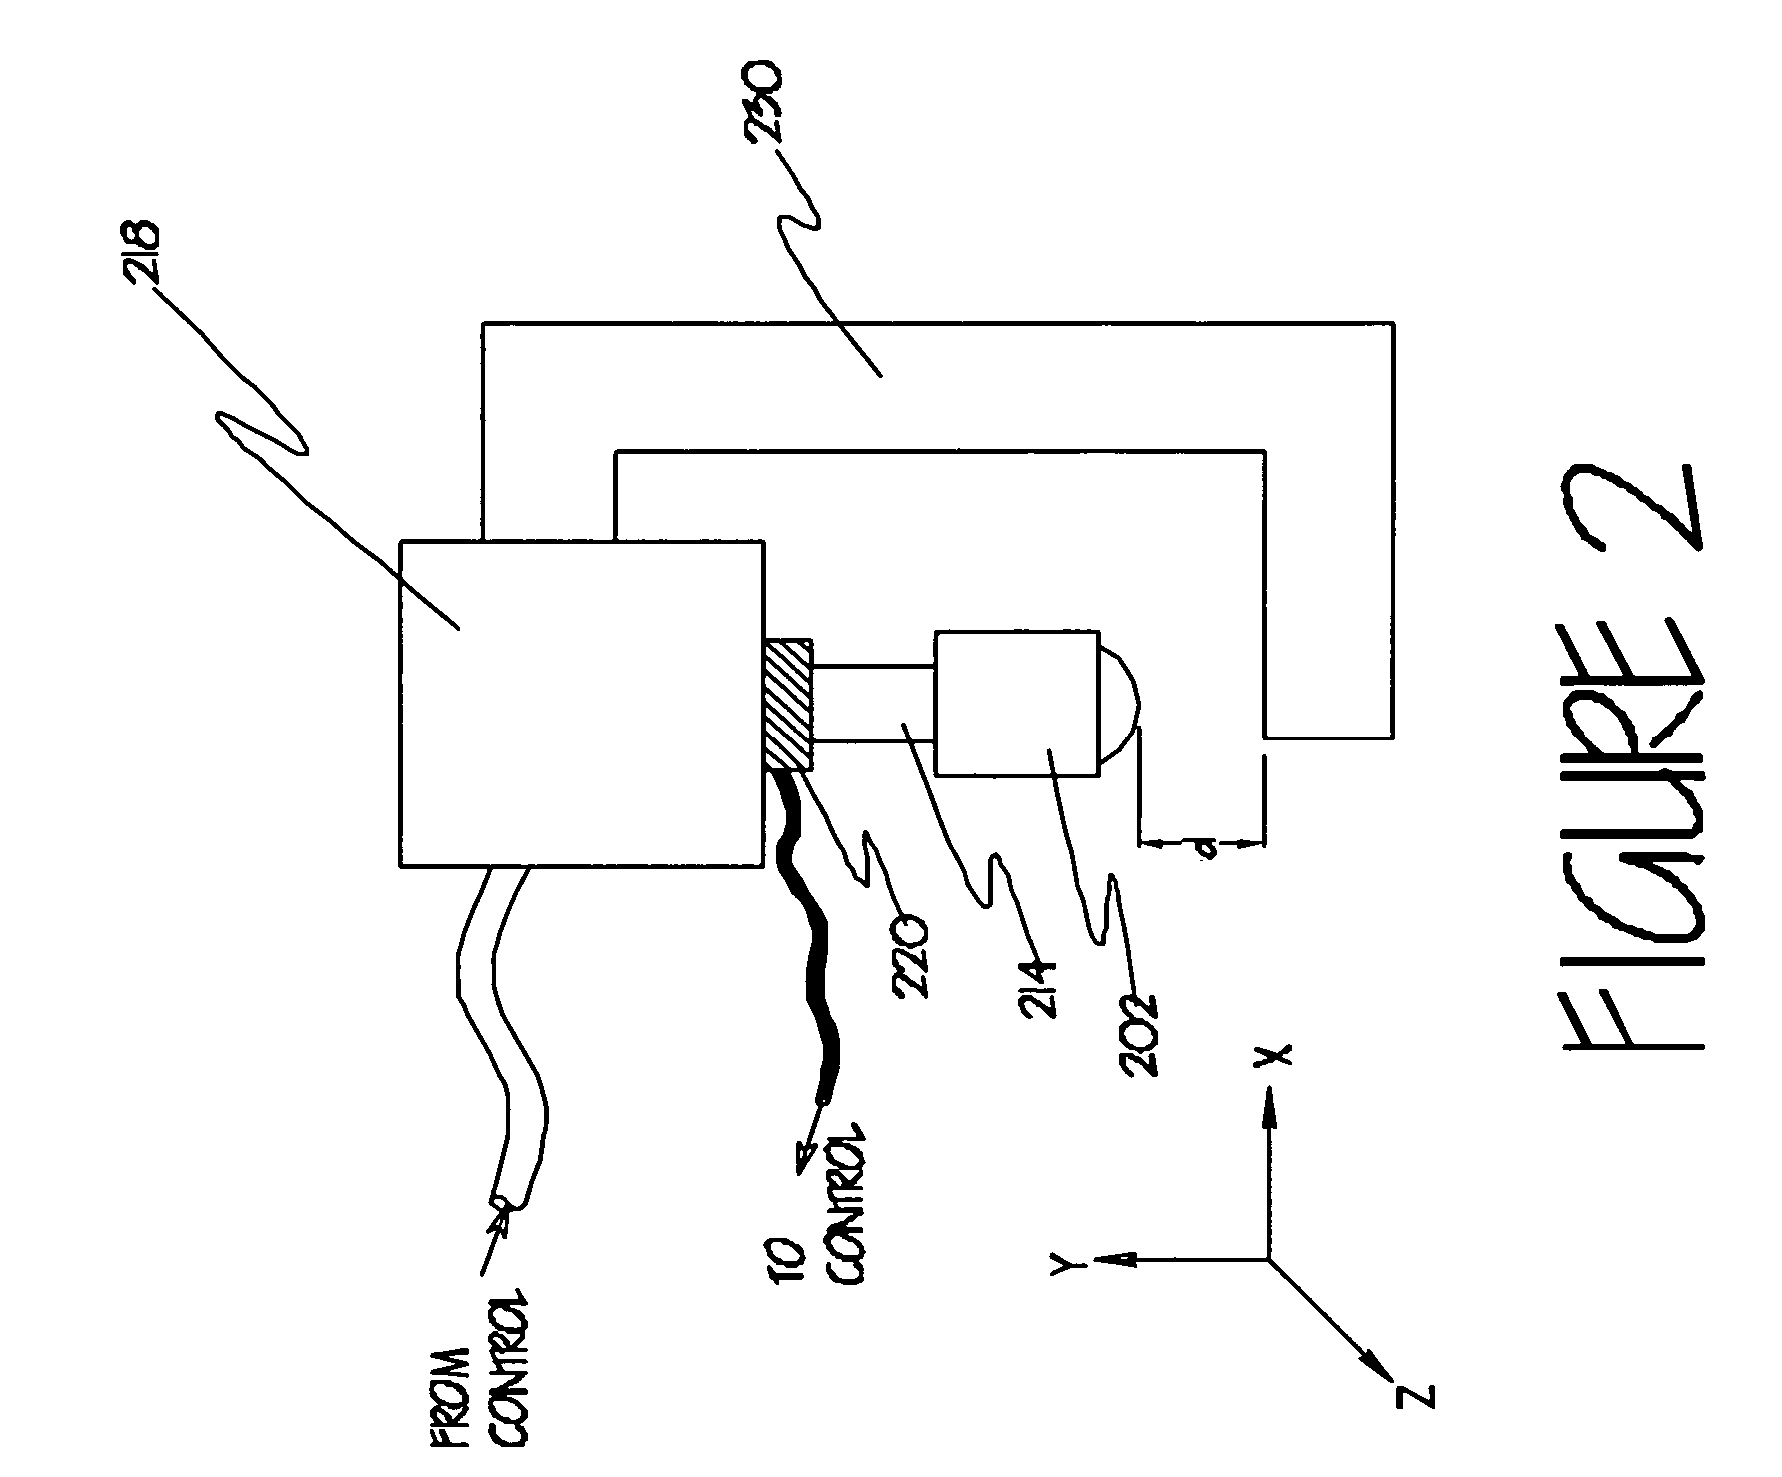 Surface treatment apparatus and method